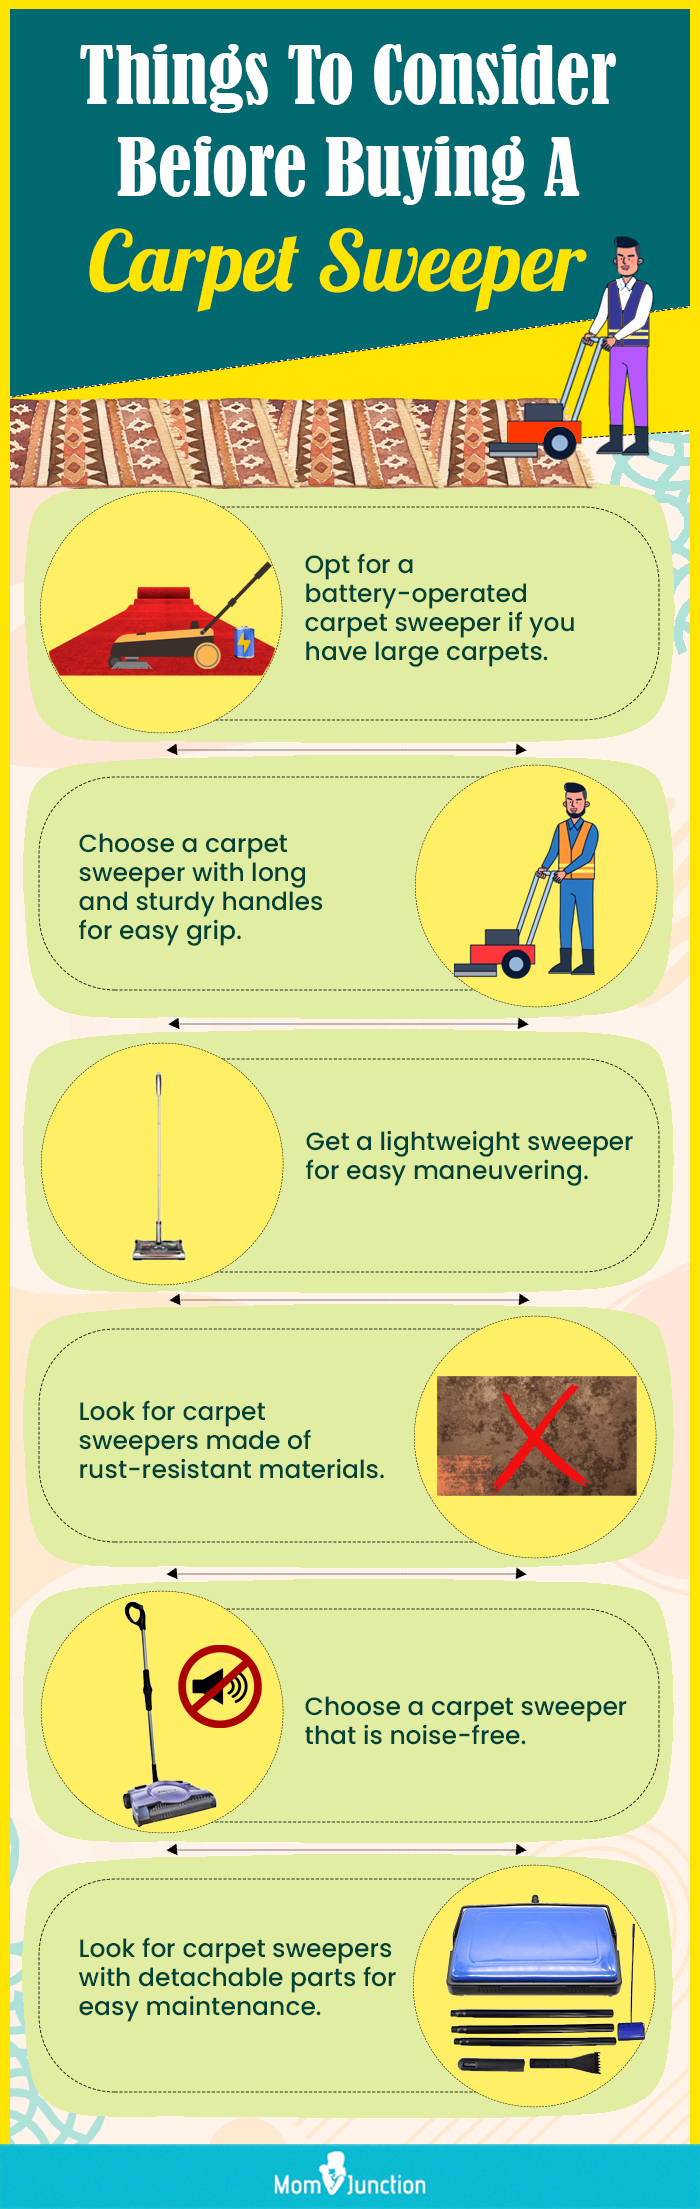 Things To Consider Before Buying A Carpet Sweeper